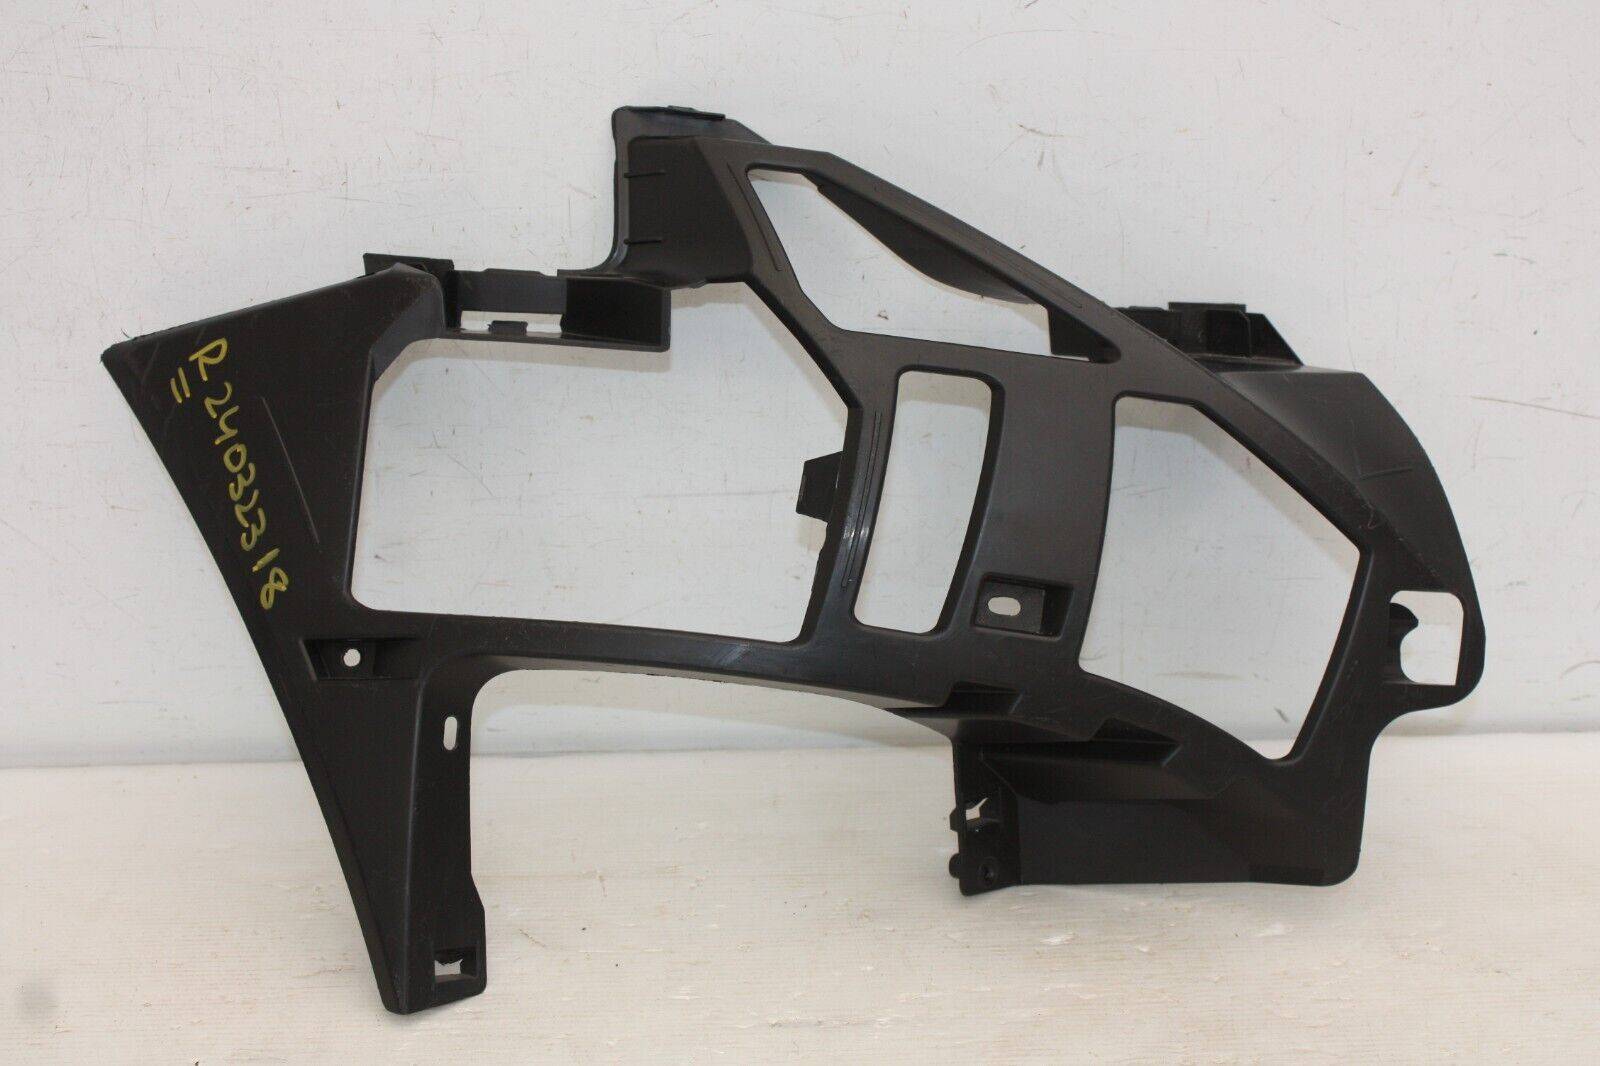 Peugeot 5008 Front Bumper Right Bracket 2017 TO 2021 9815337580 Genuine 175666046694